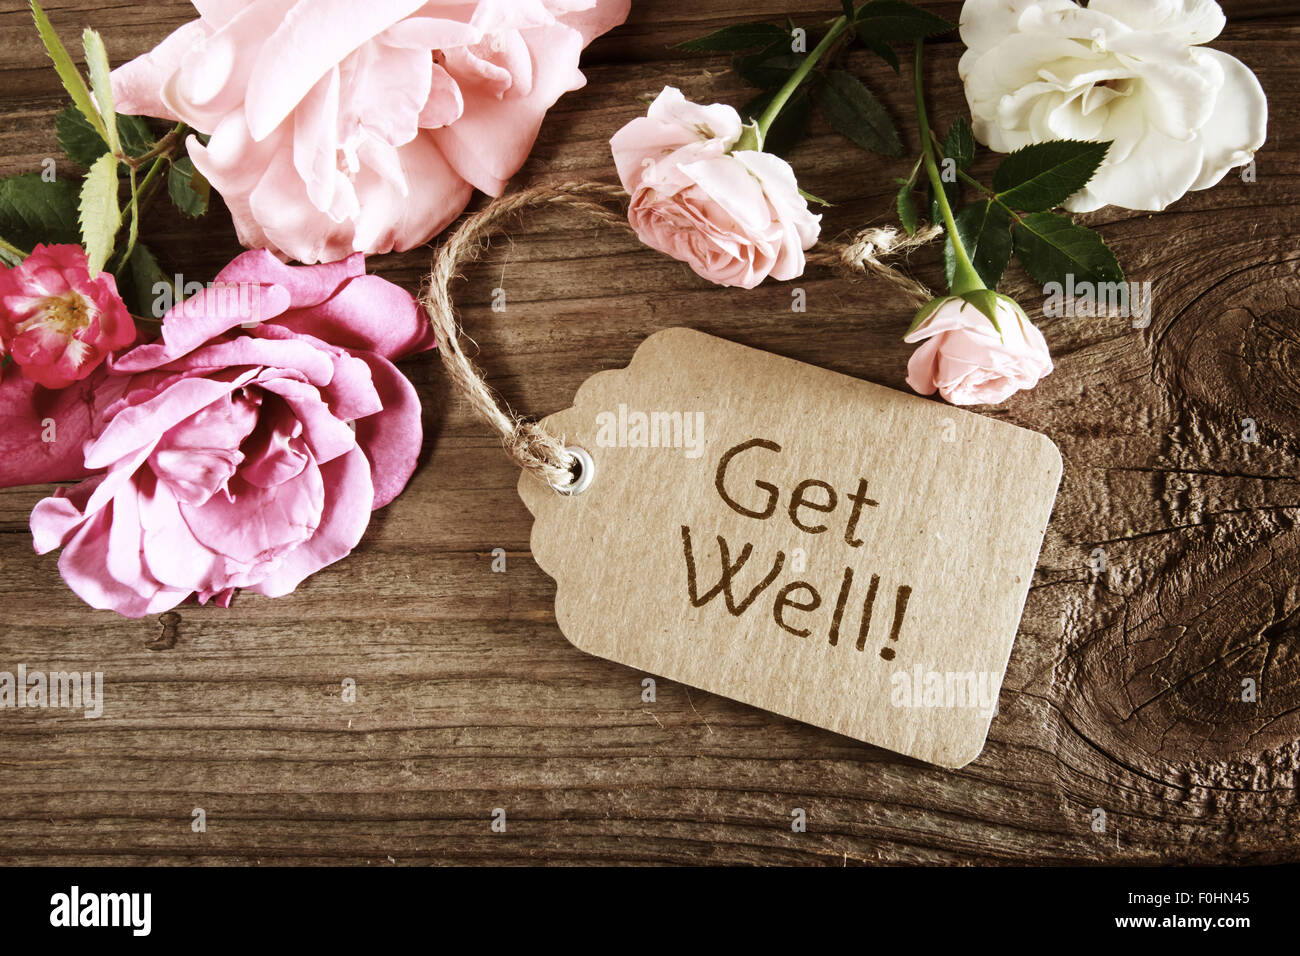 Get well message tag with roses wooden table Stock Photo